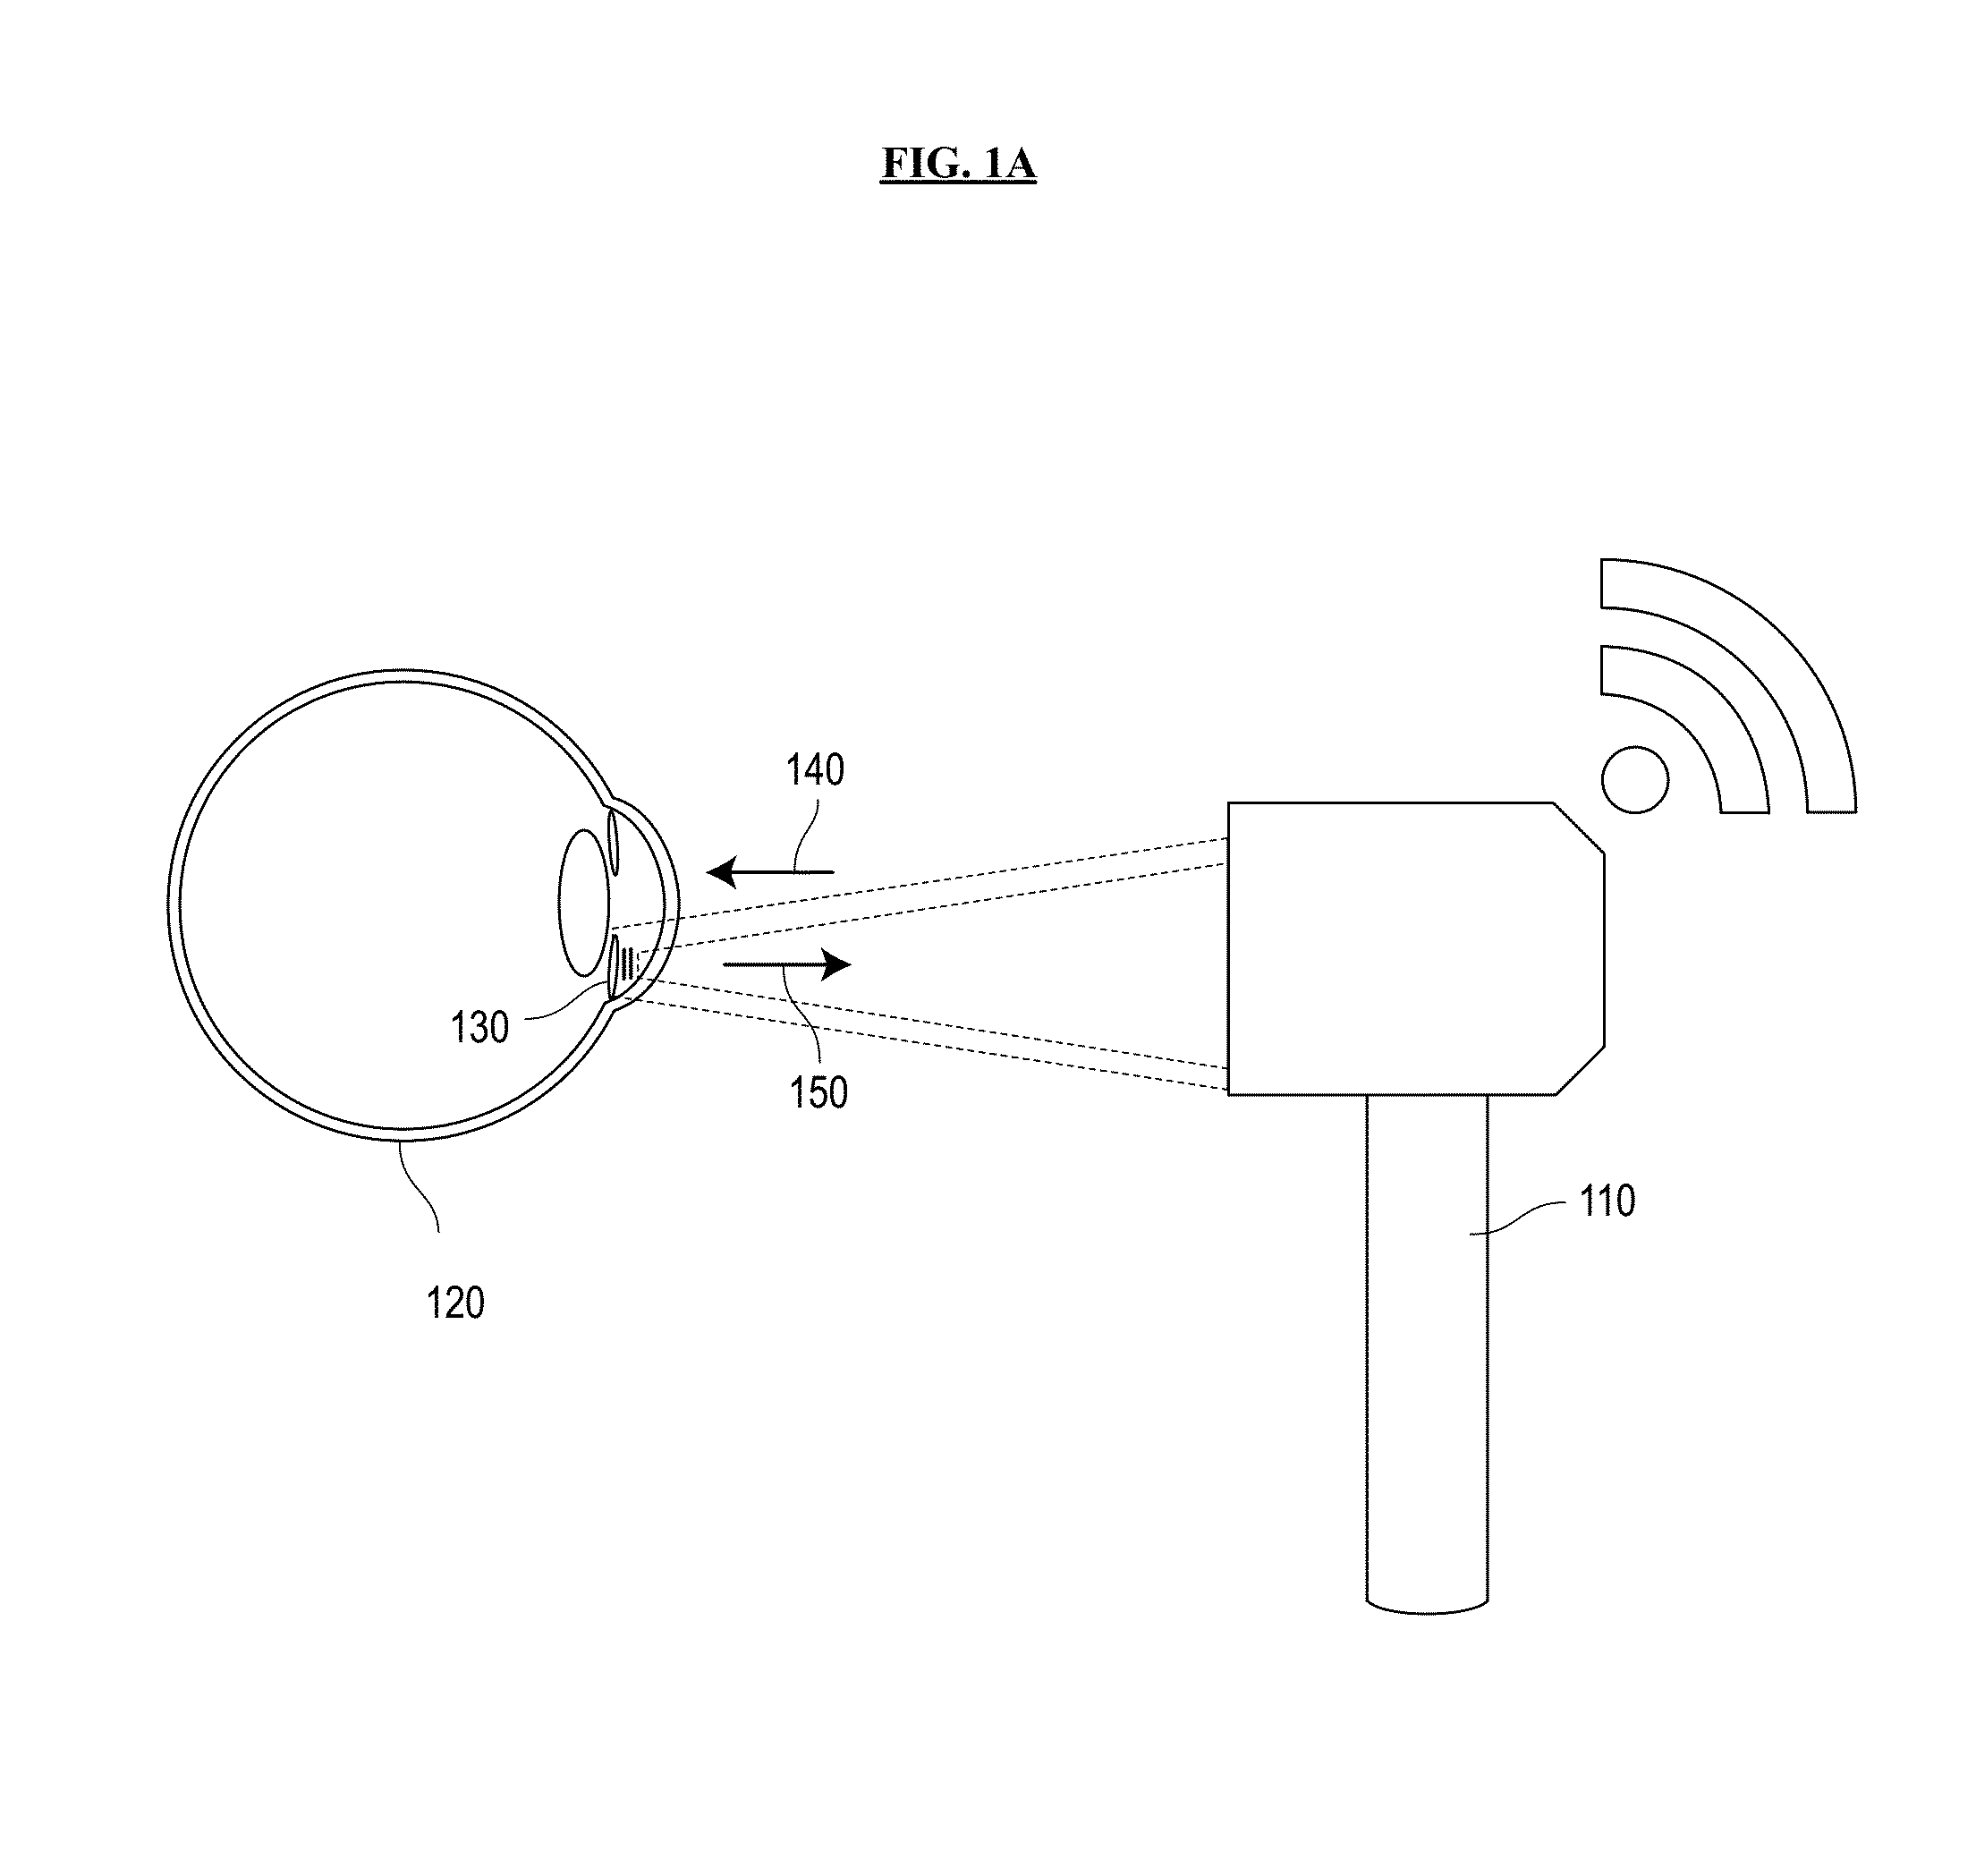 System and method for sensing intraocular pressure